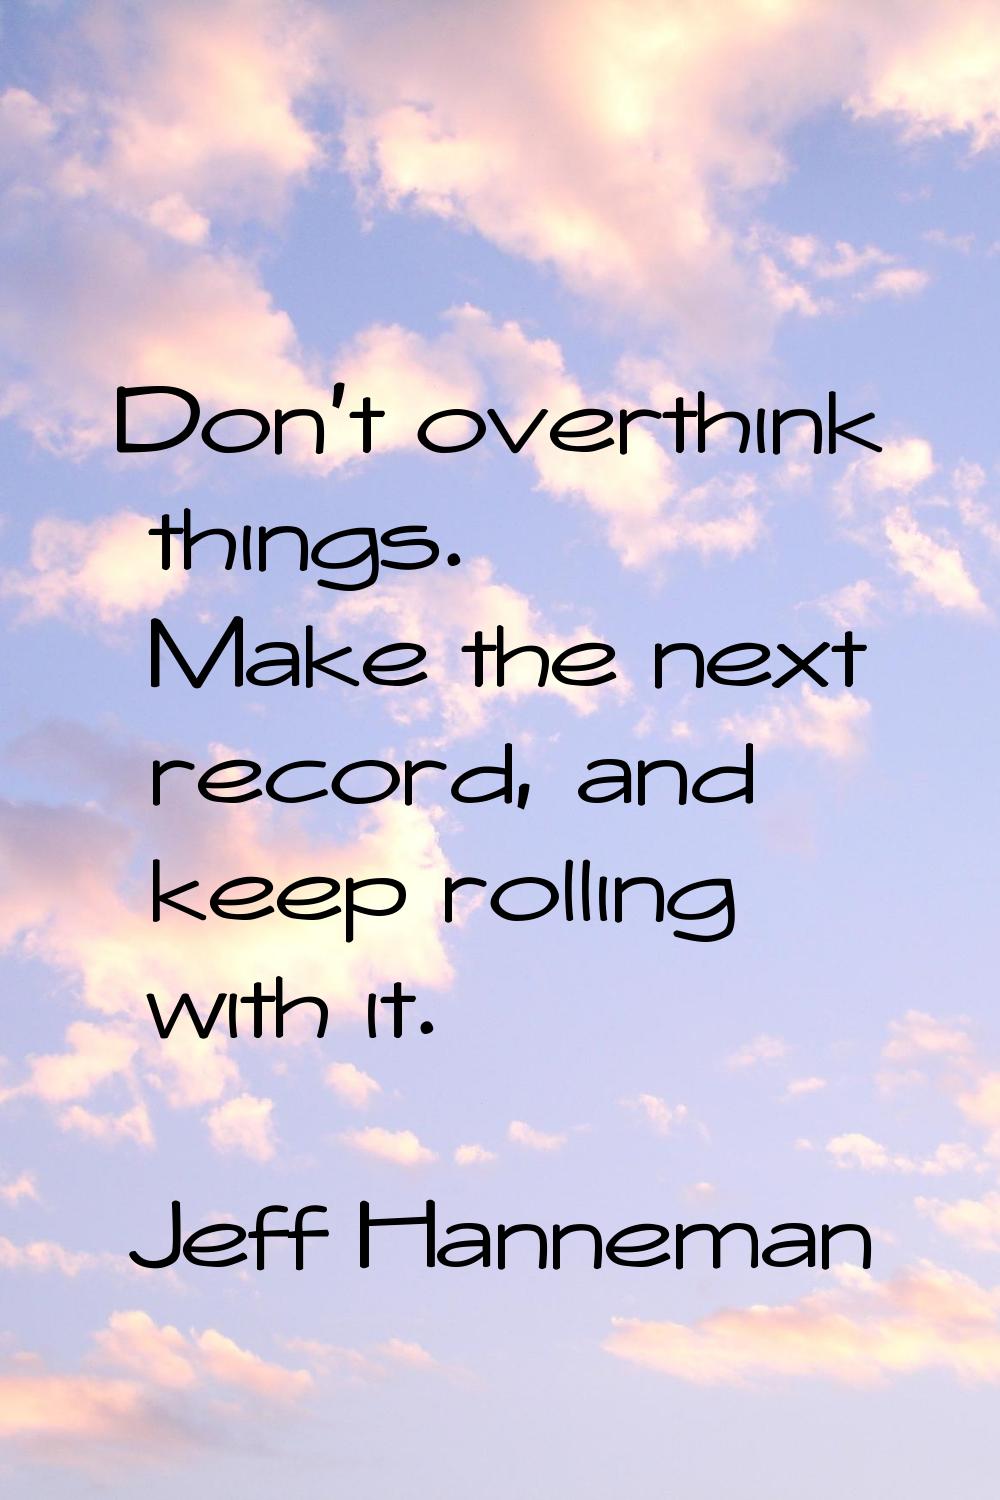 Don't overthink things. Make the next record, and keep rolling with it.